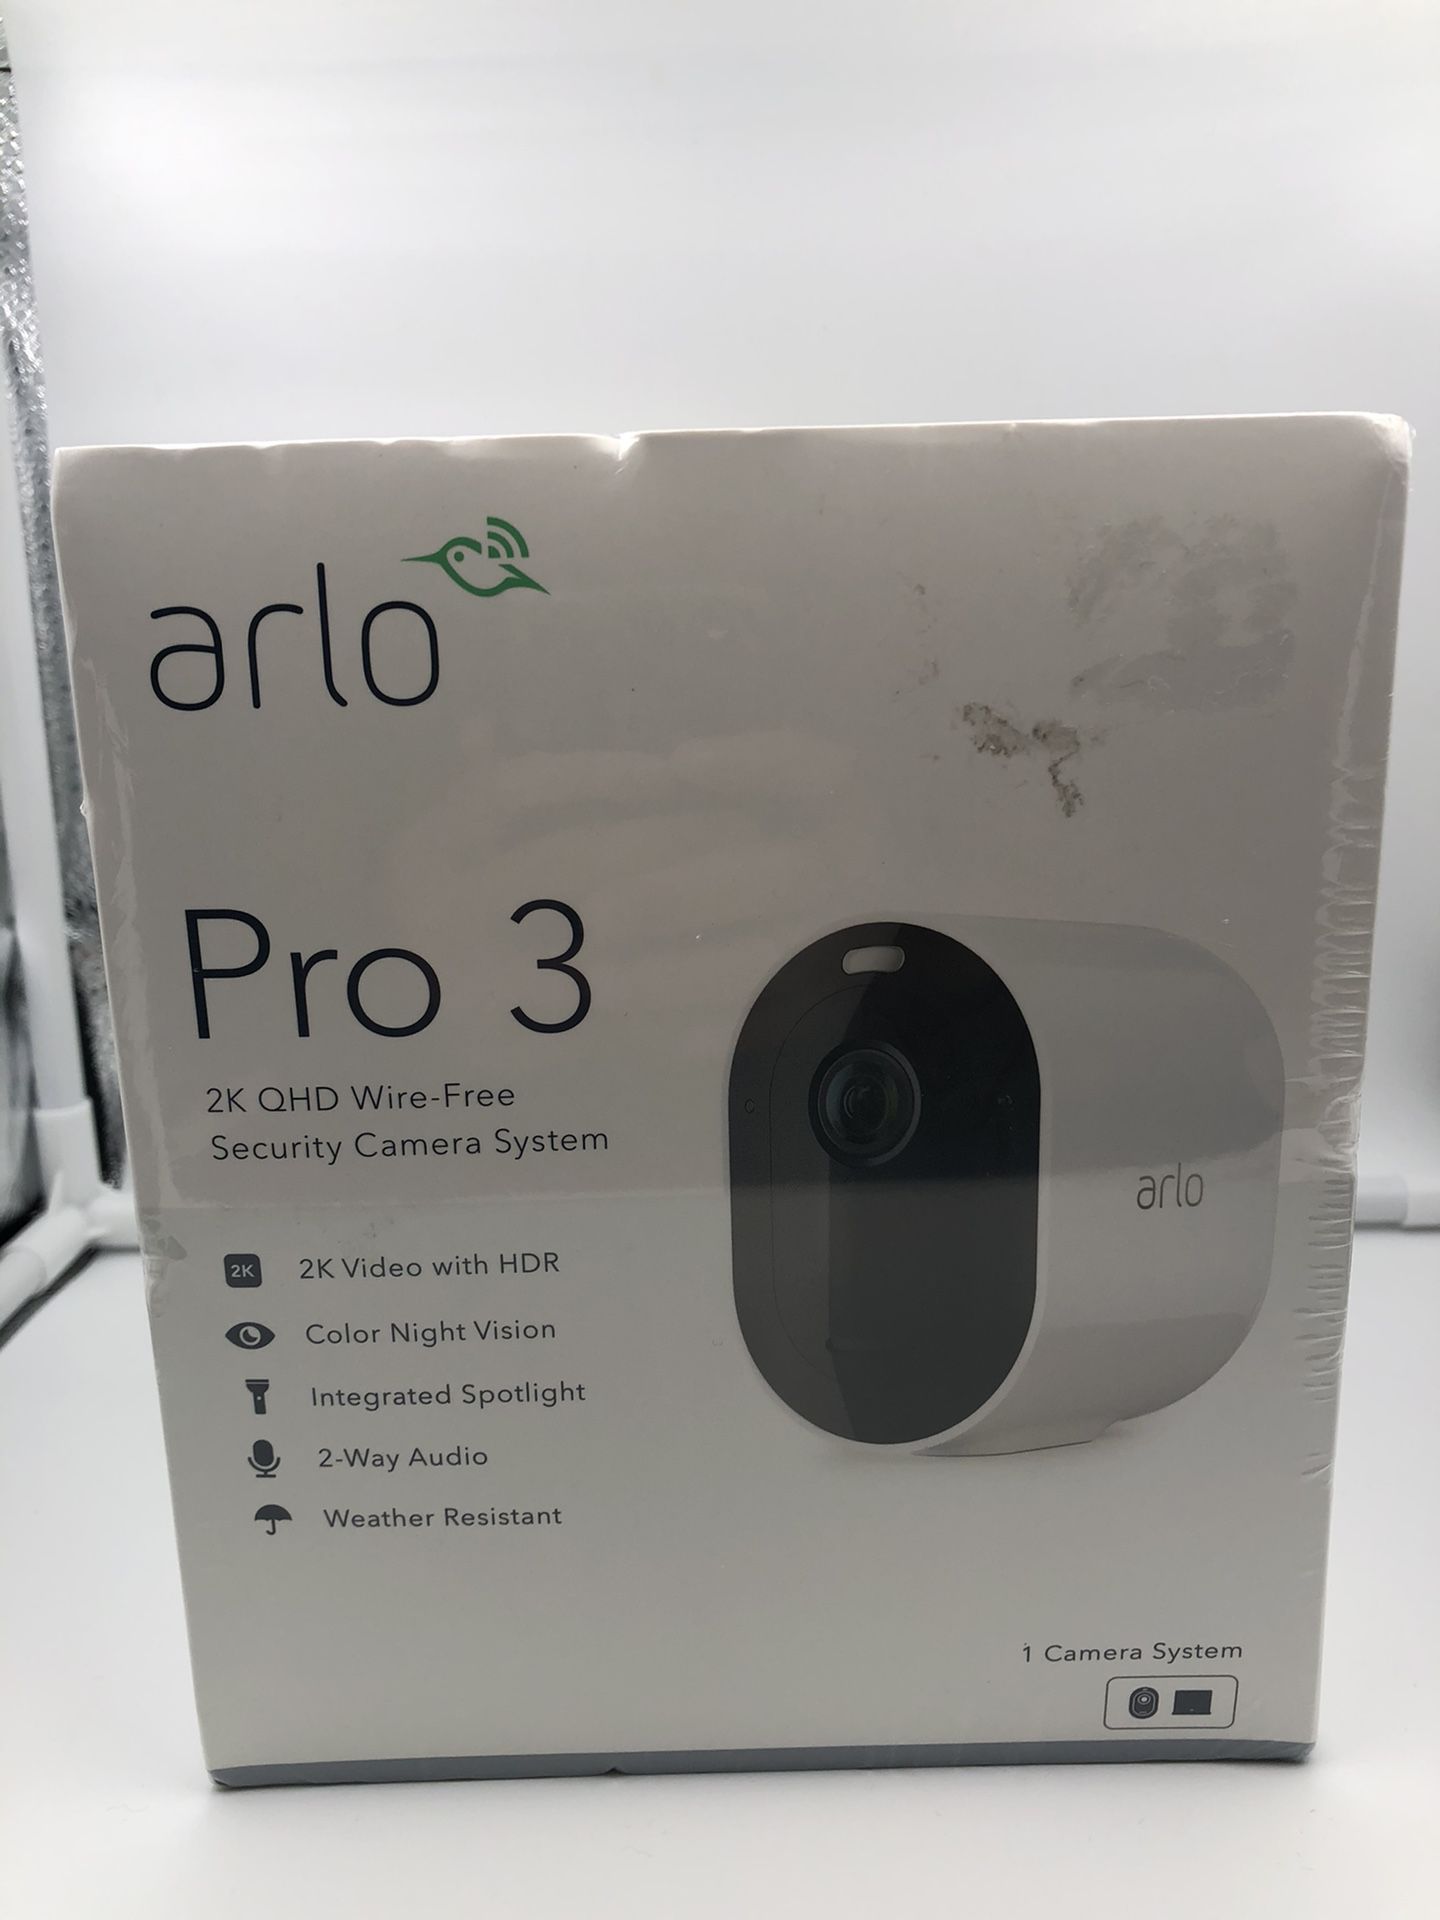 Brand new Arlo PRO 3 2K QHD Wire-Free Security Camera System